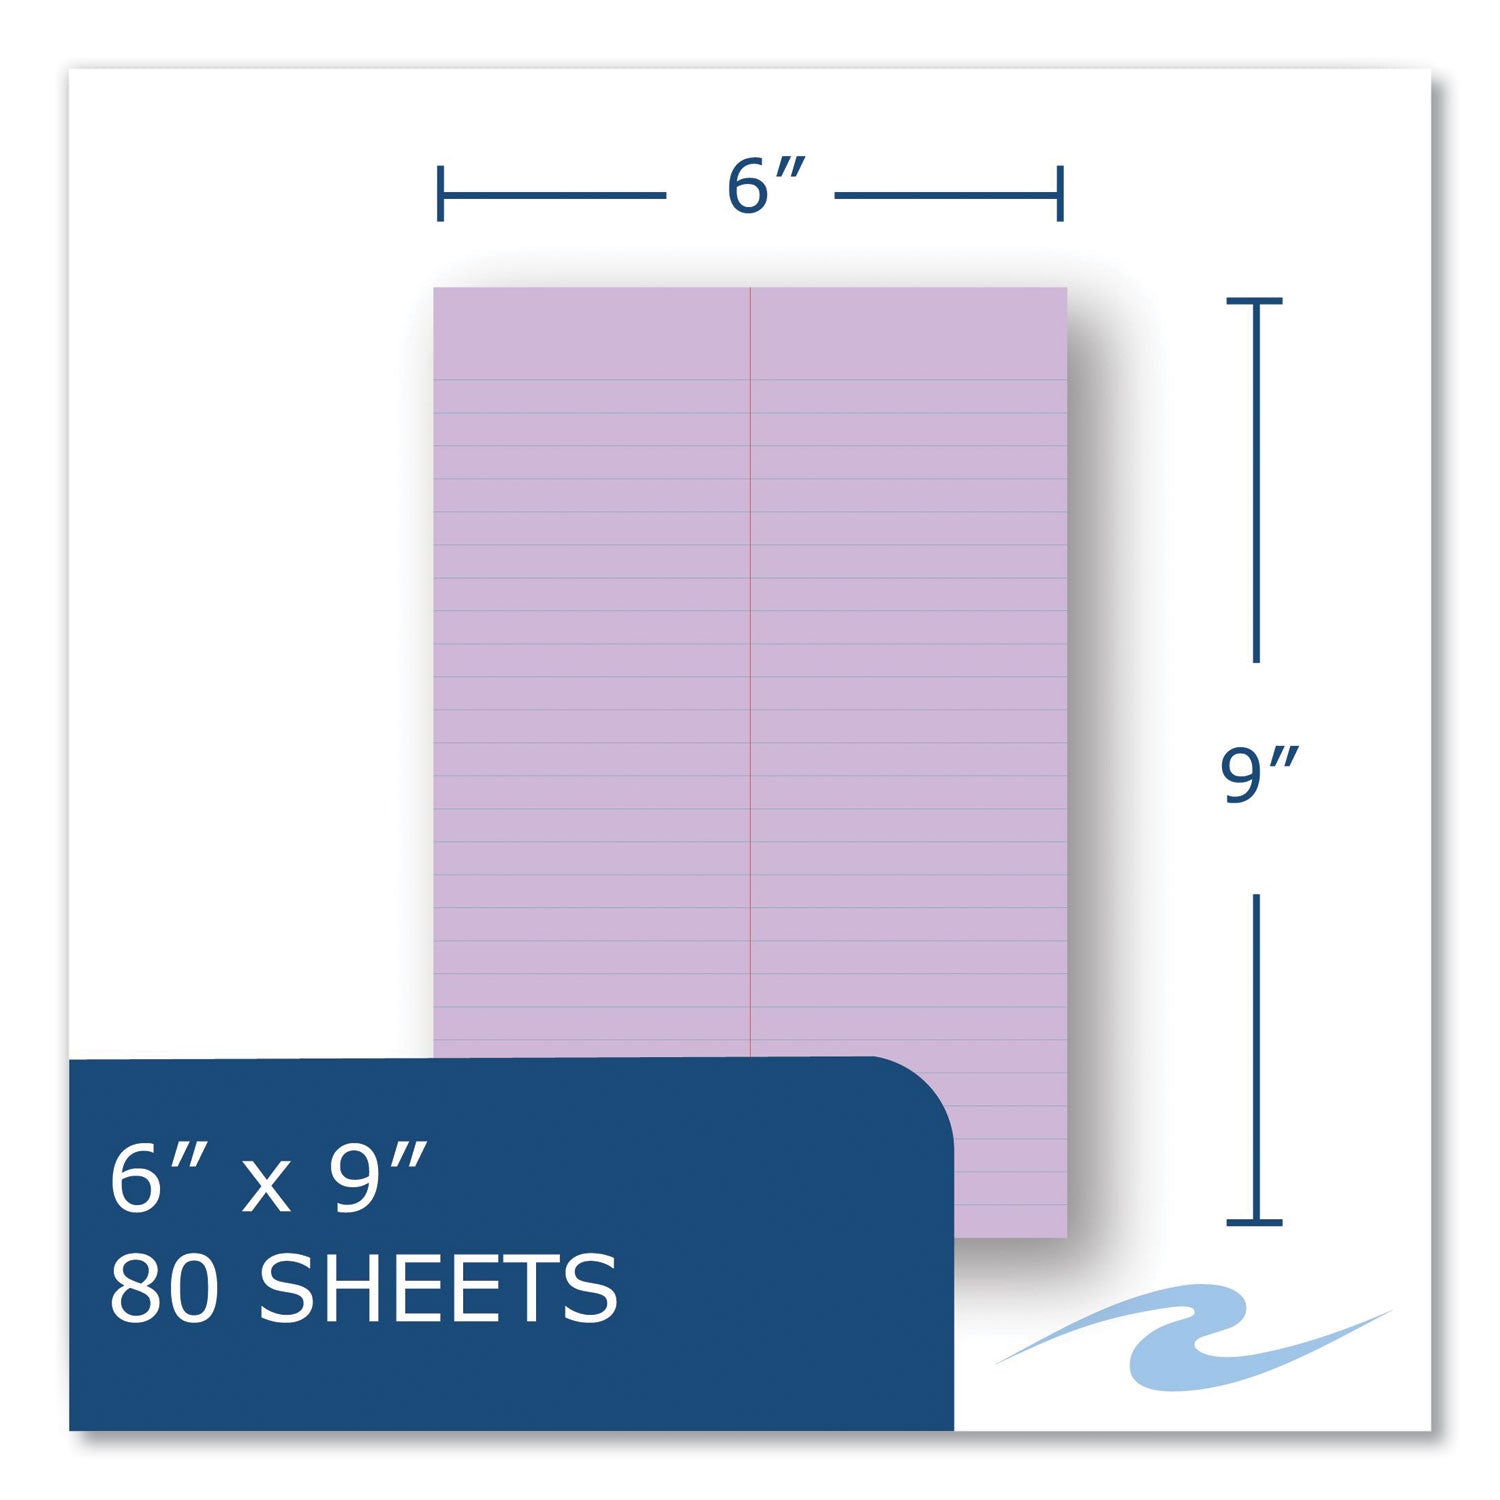 Enviroshades Steno Notepad, Gregg Rule, White Cover, 80 Orchid 6 x 9 Sheets, 4/Pack - 